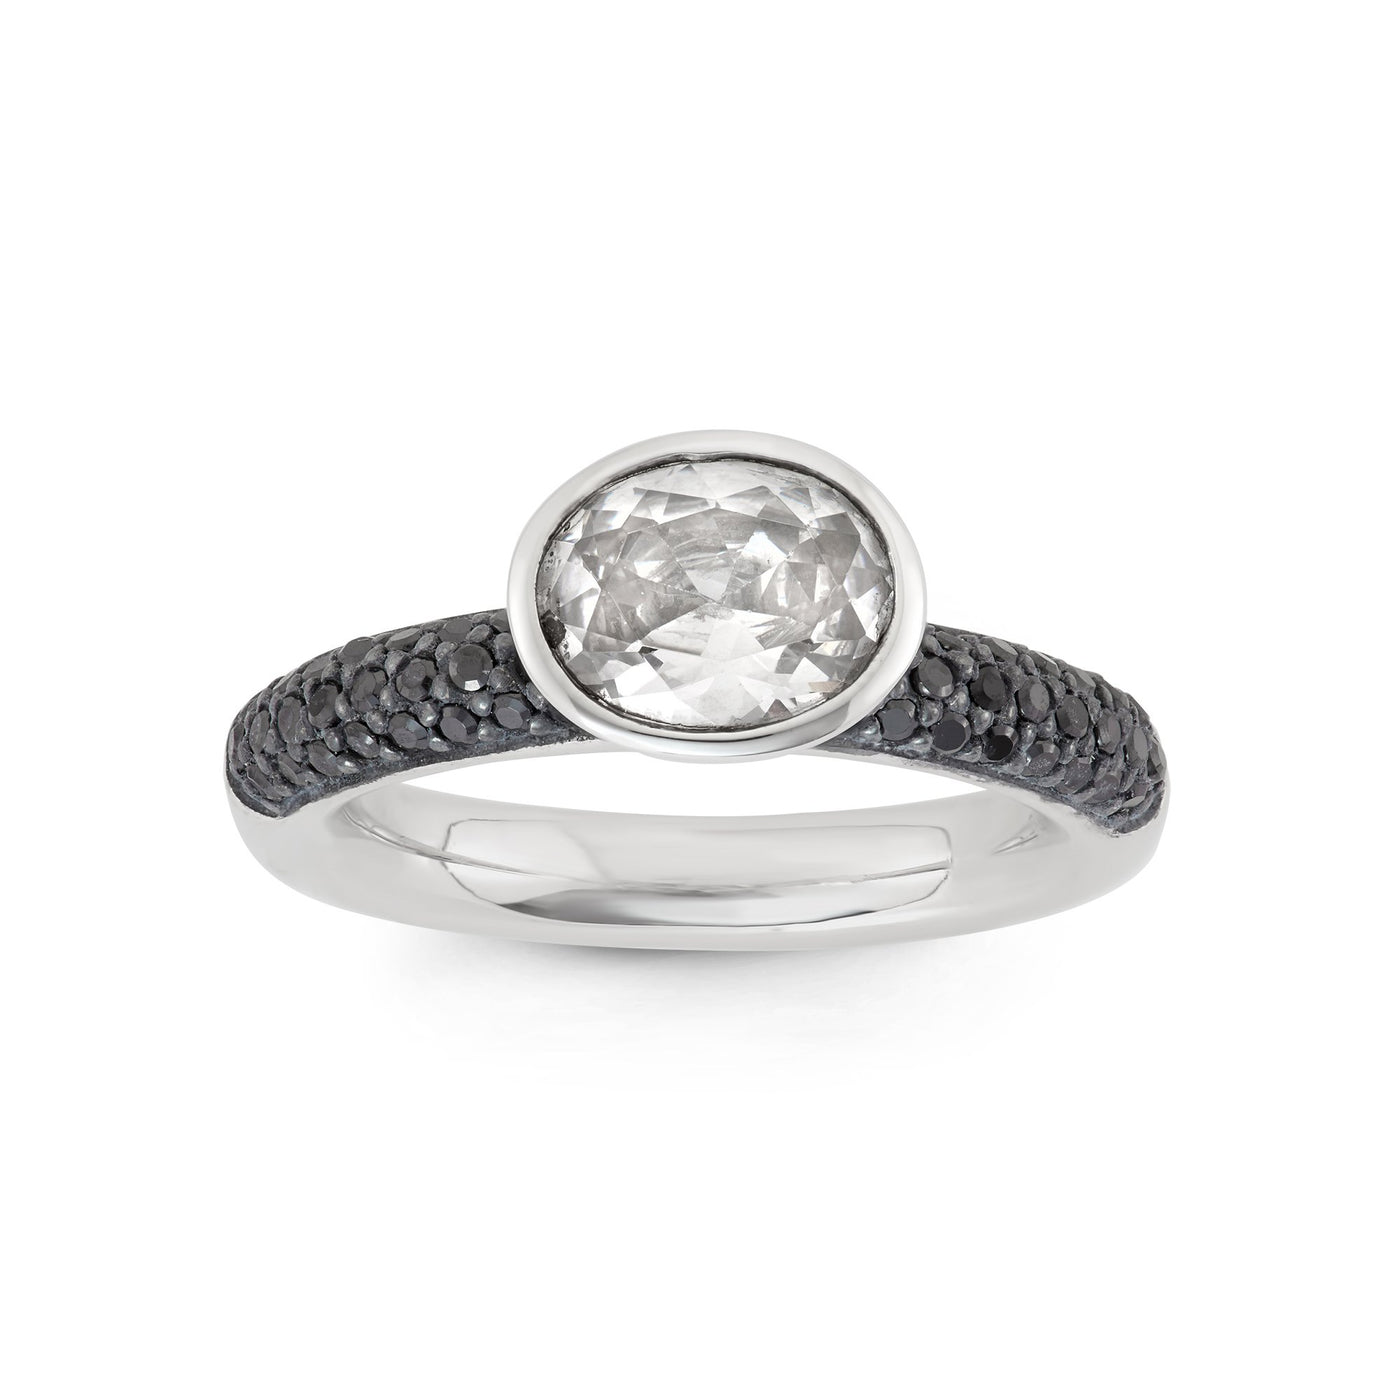 Sterling Silver Spinning Ring With Pave Black CZ and White CZ Center Stone